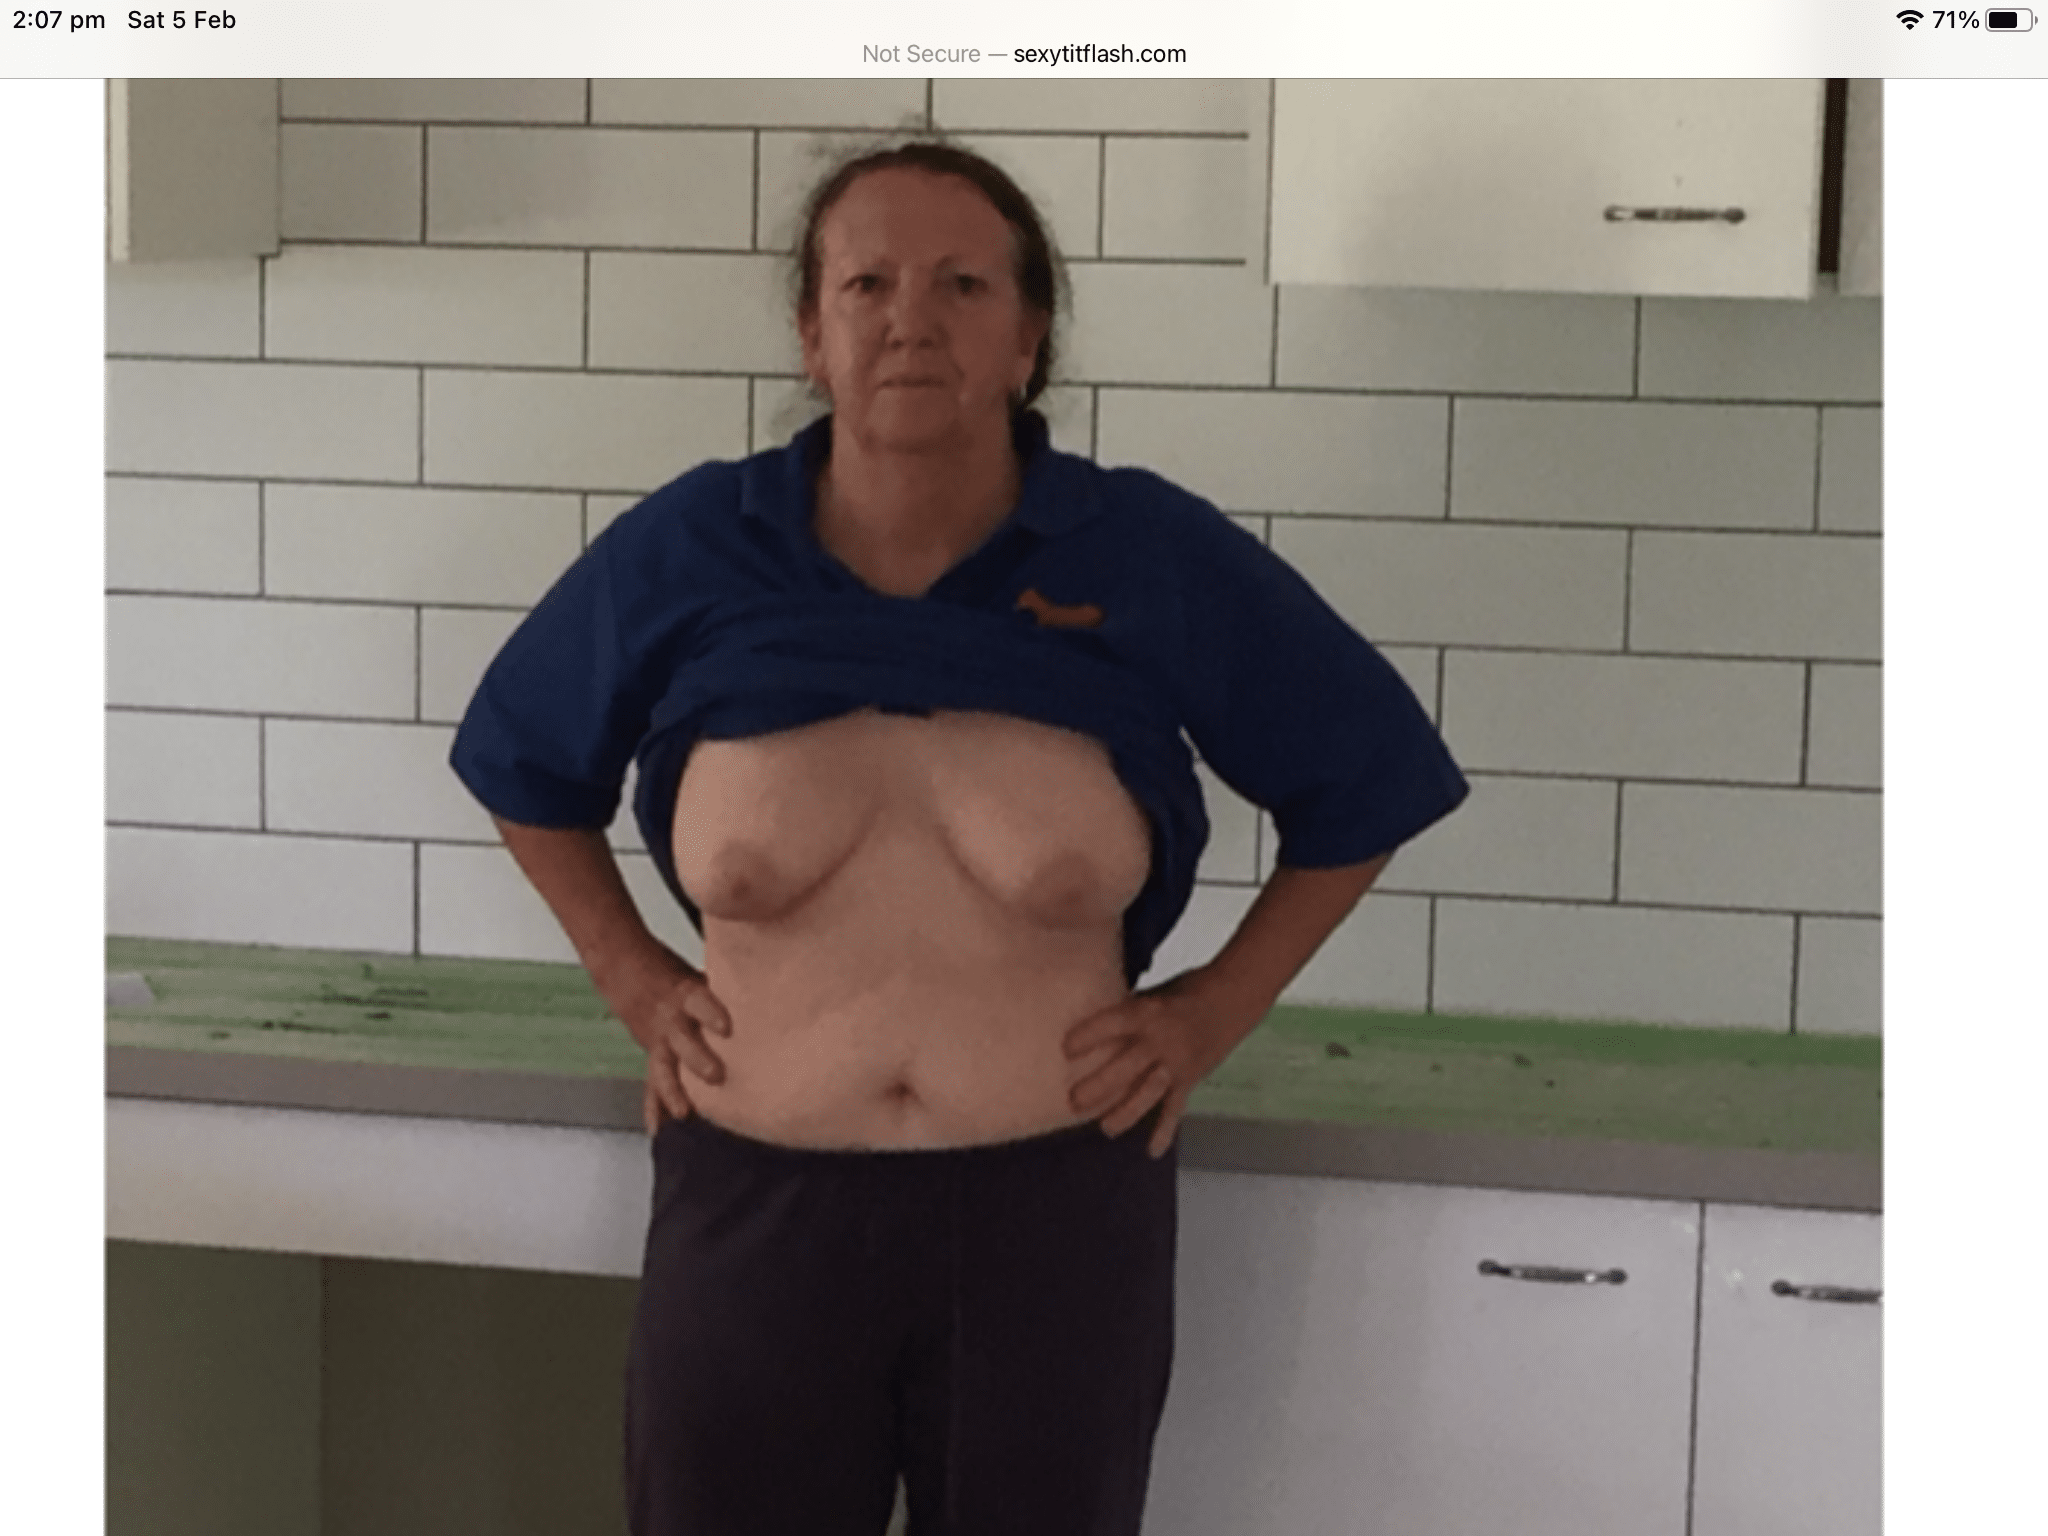 tween tits - Having my tits out at work for the boys to enjoy All the boys sitting around at lunch time next I hear show us your tits why not give them a show now all get hey nice tits love your... - Boobs Flash Pics